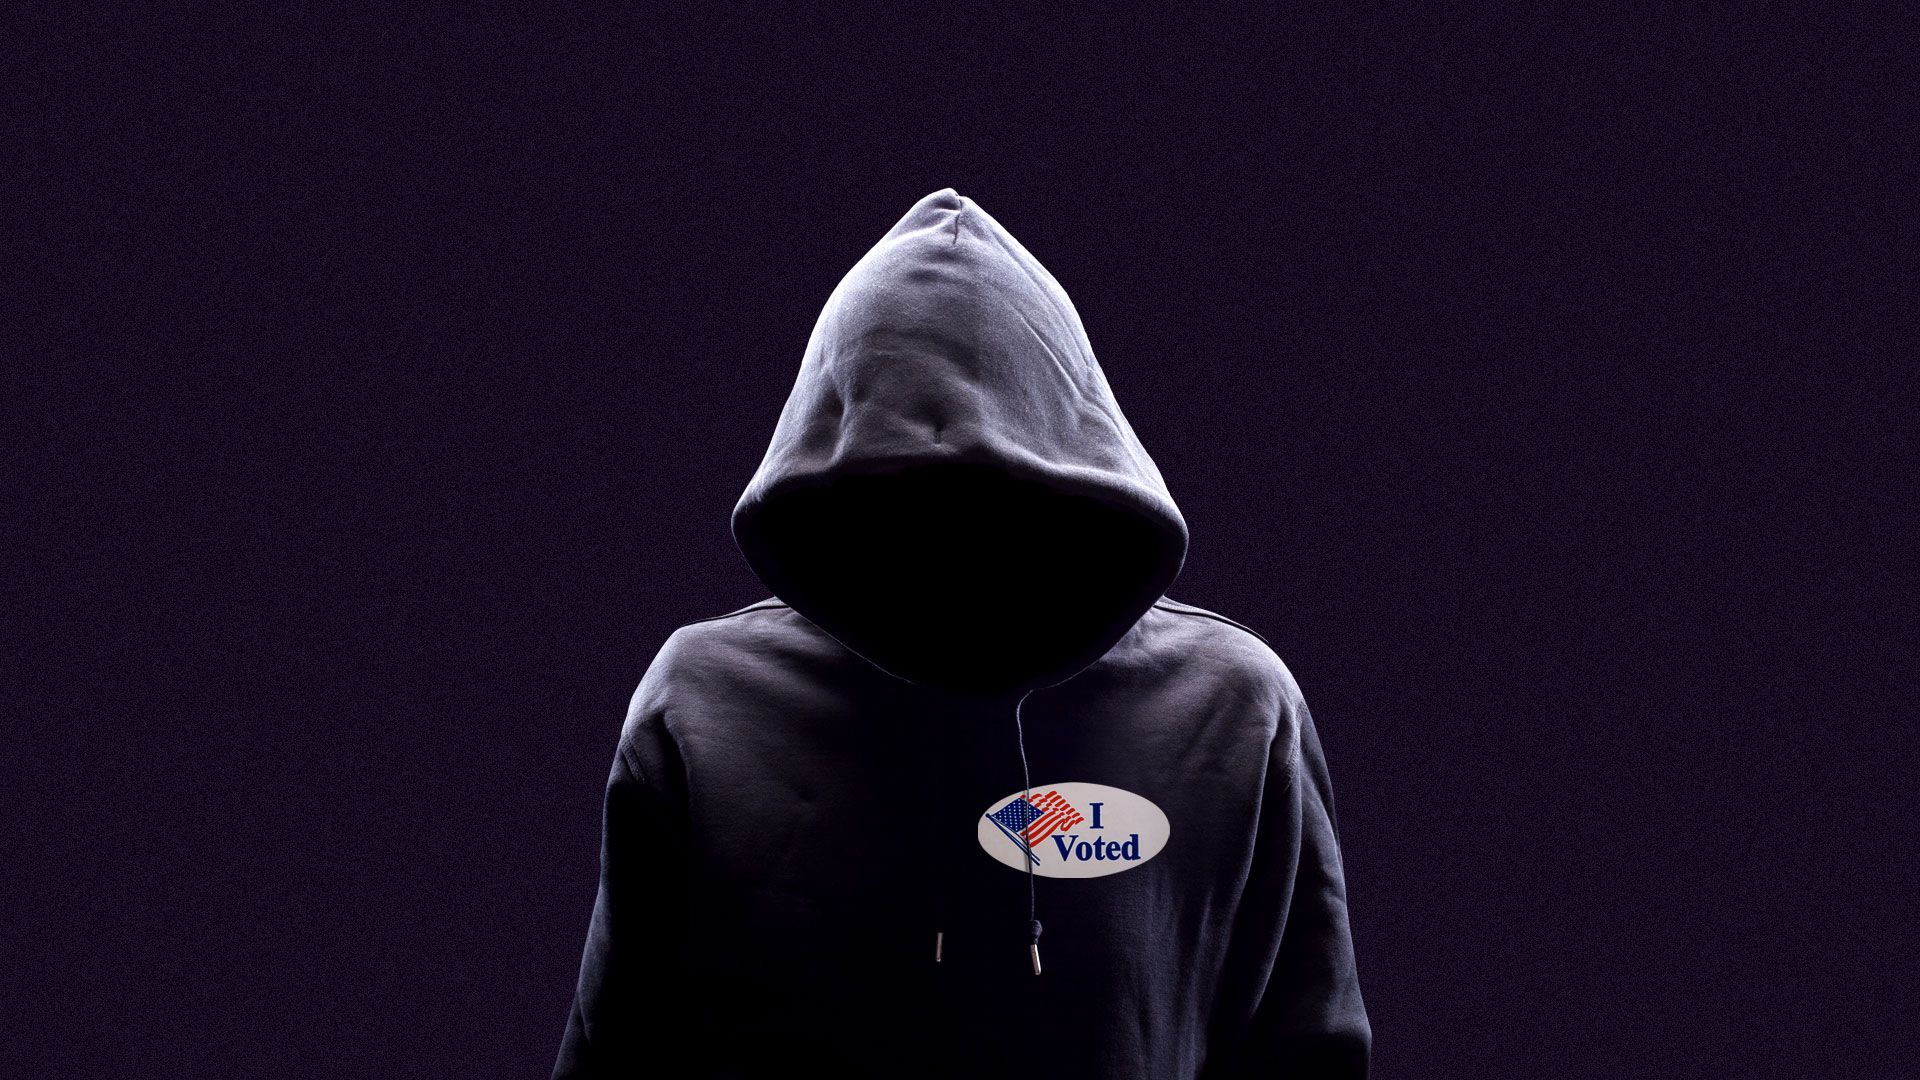  Illustration of anonymous person in a hoodie with a “I voted” sticker.